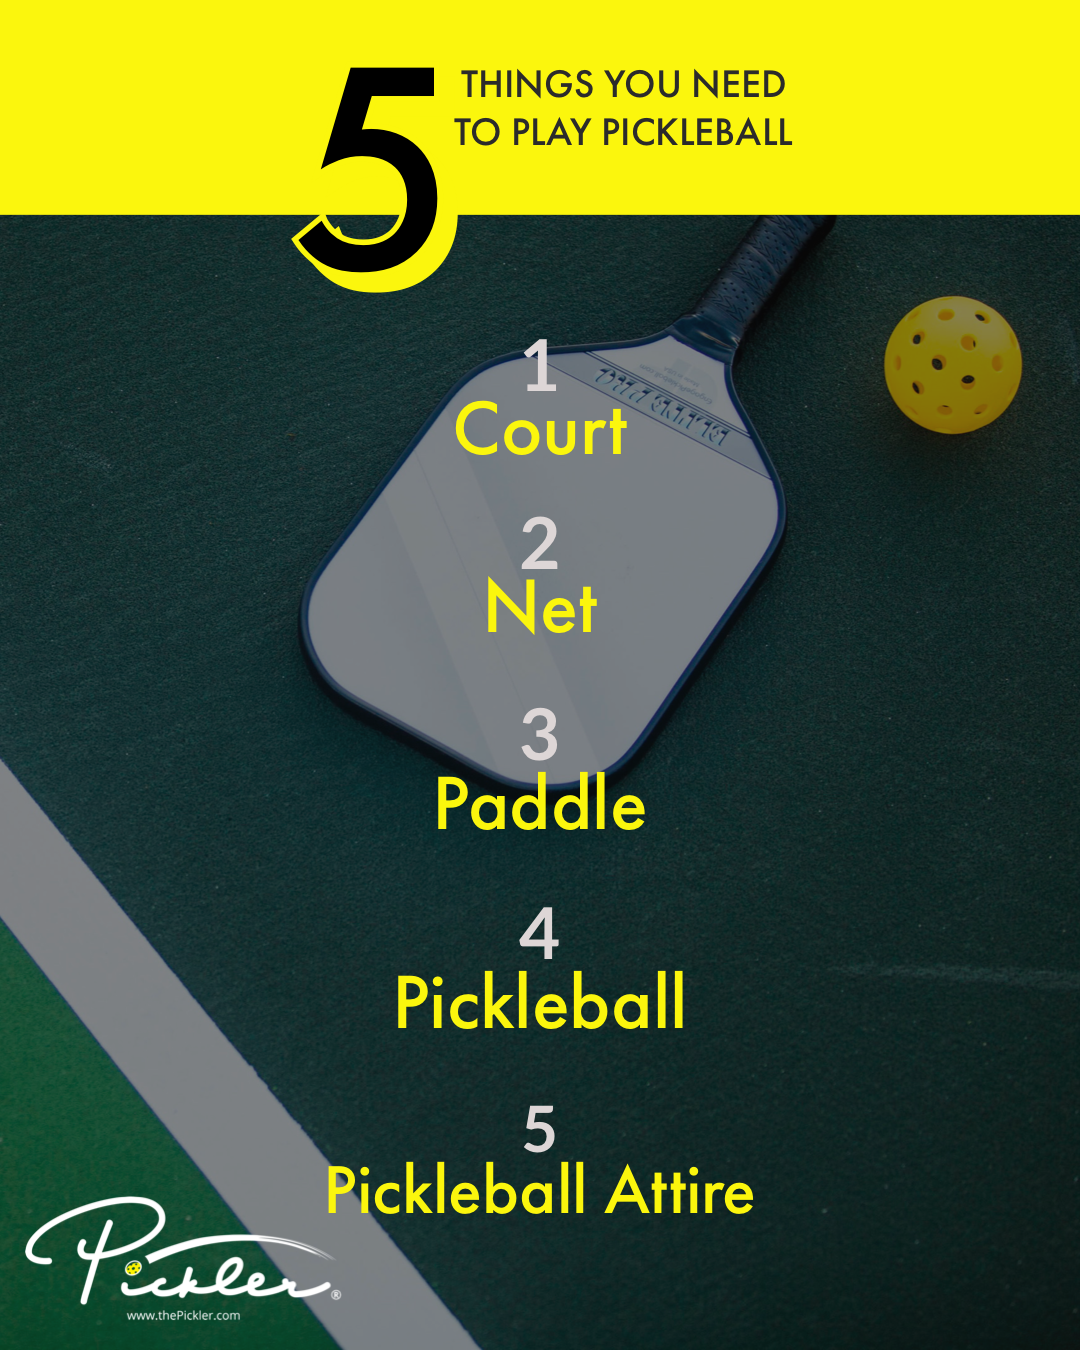 Things Need to Play Pickleball | Pickler Pickleball